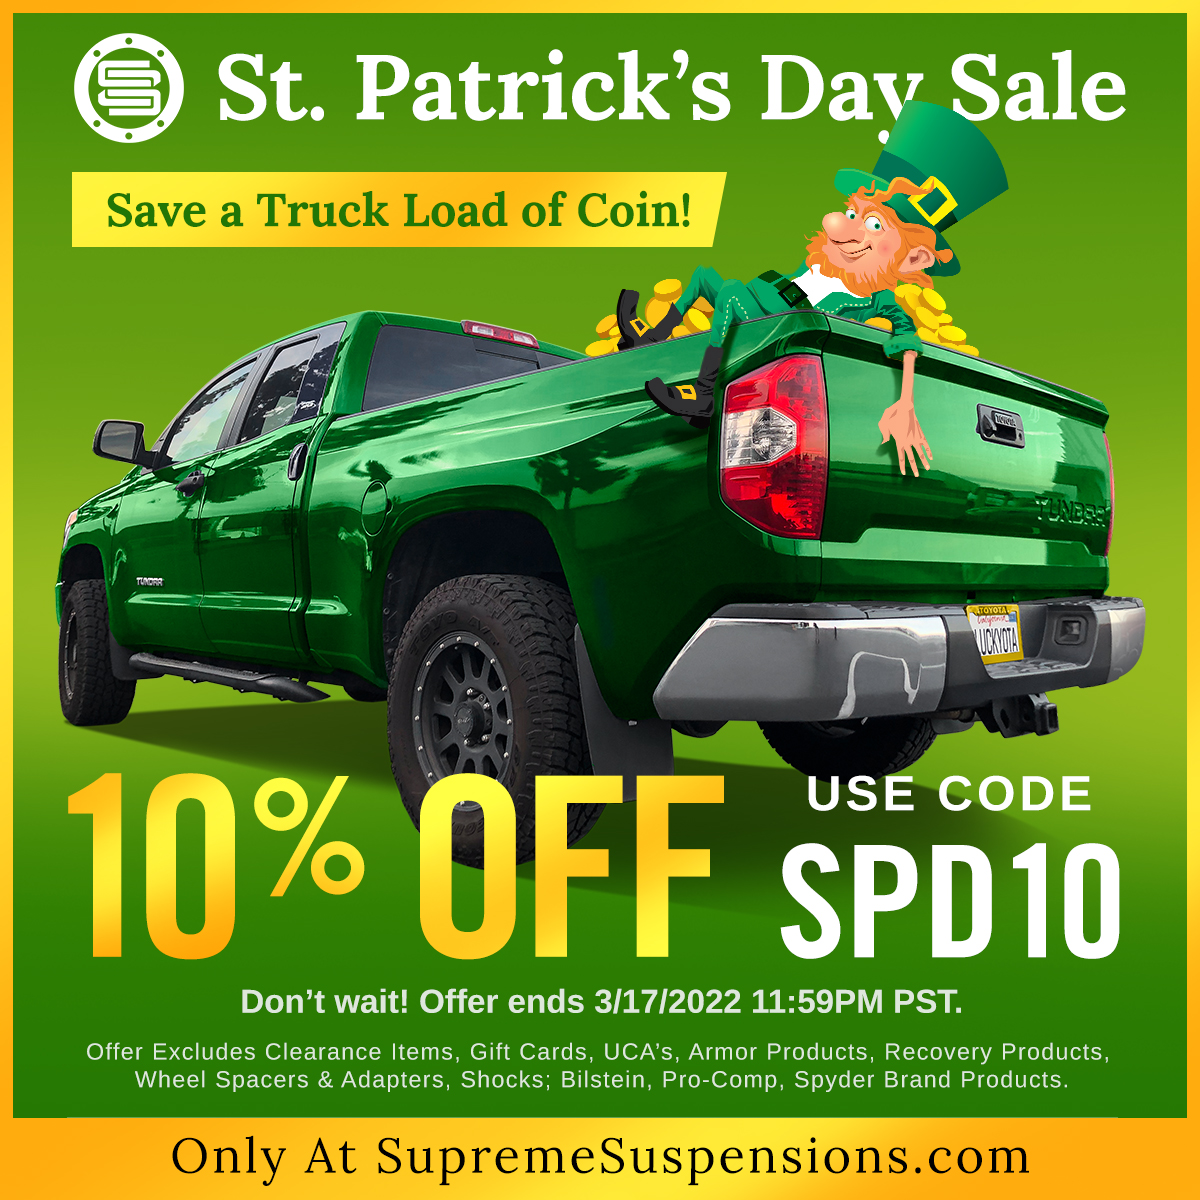 #Save a Truck-Load of Coin! Get 10% OFF your #Lift & #LevelingKit Order with our #StPatricksDay #Sale. Use Code SPD10 at #supremesuspensions

supremesuspensions.com